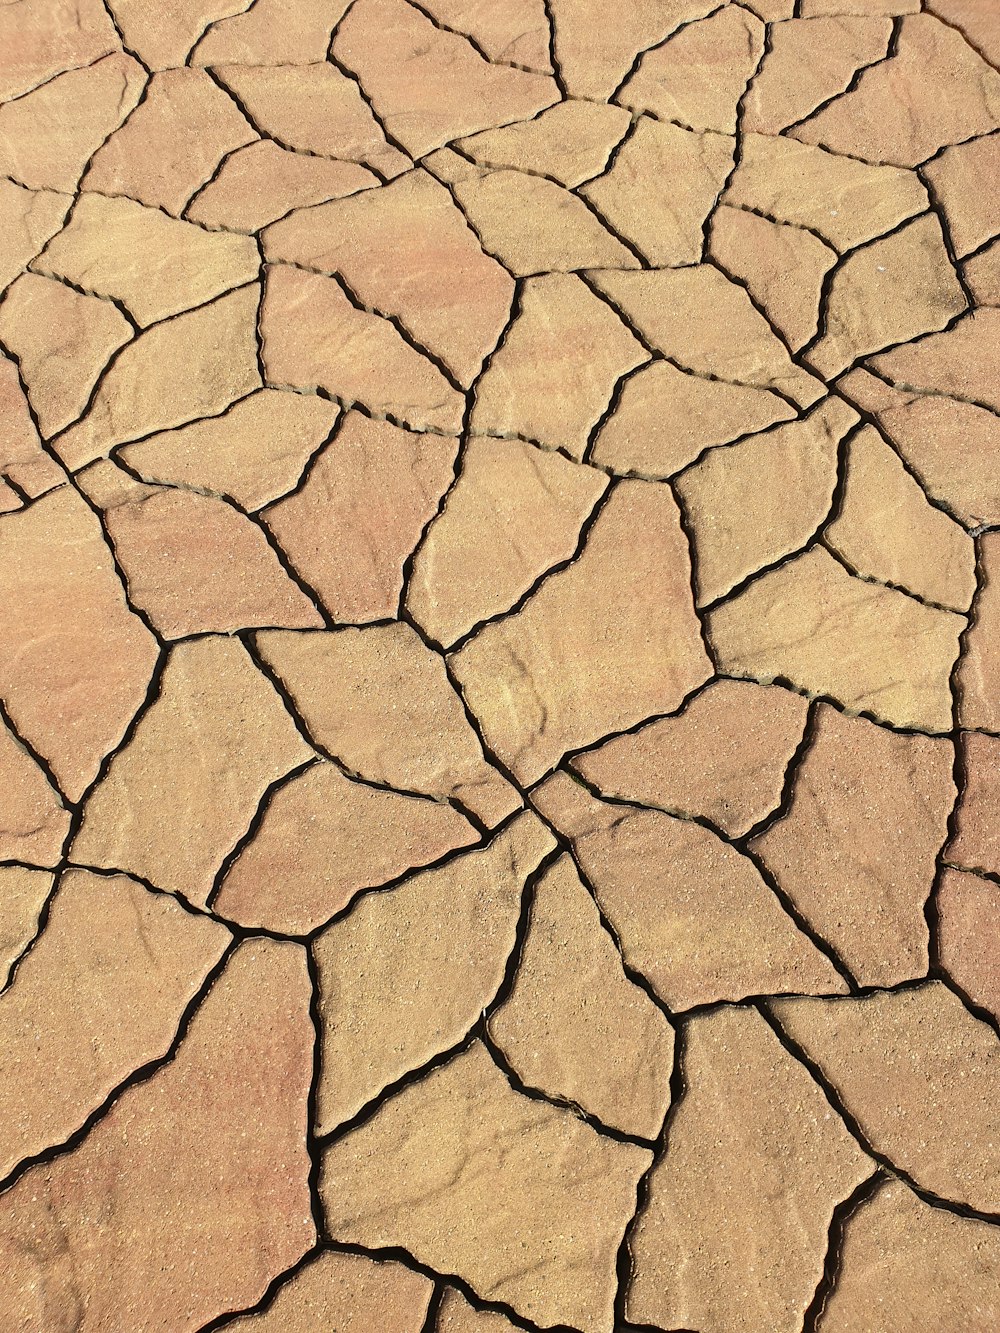 a close up view of a cracked concrete surface